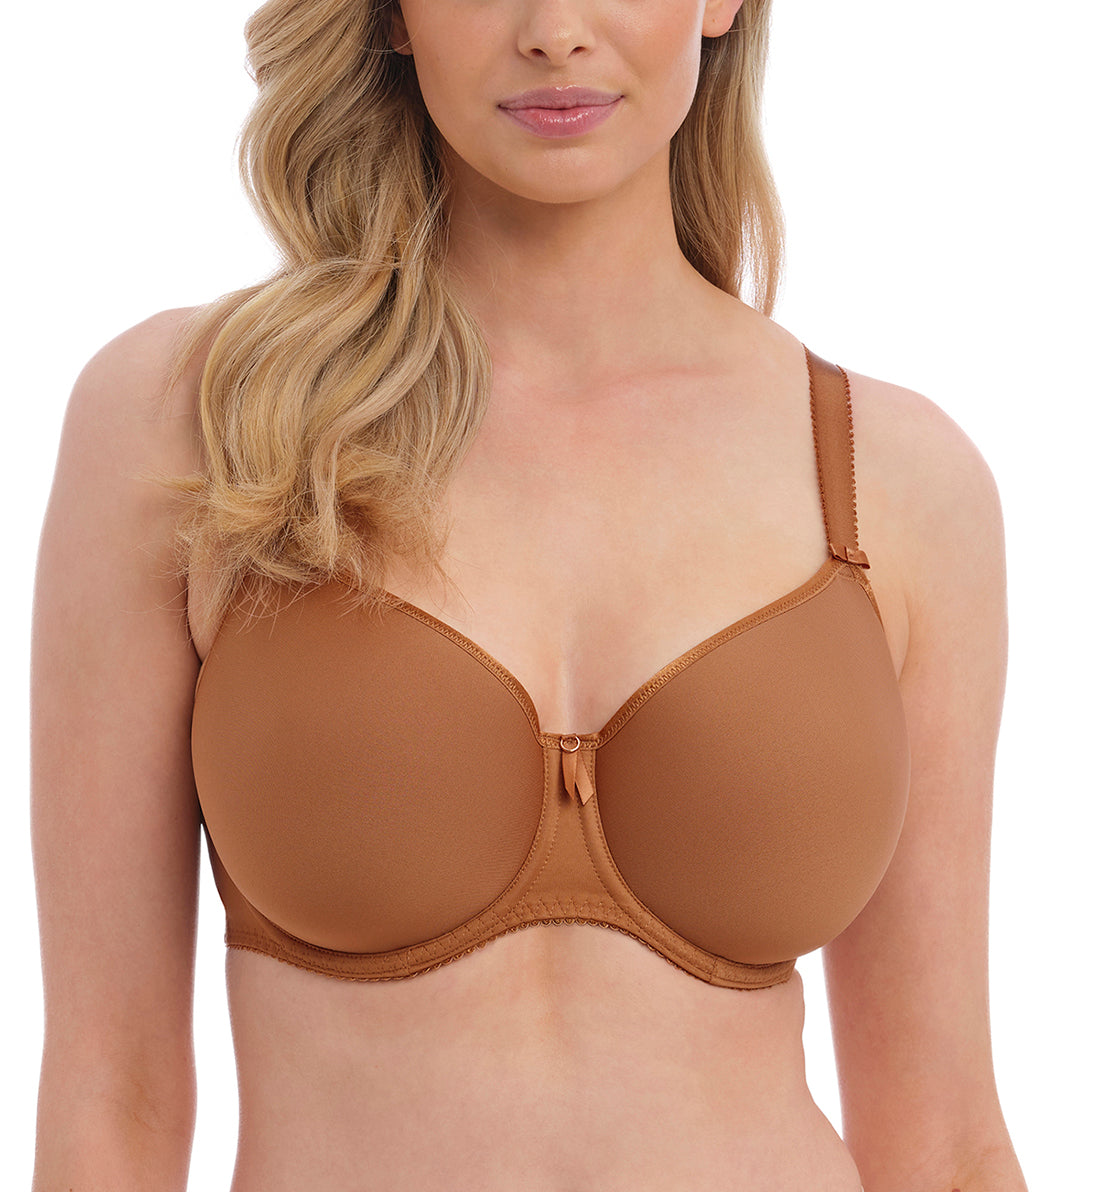 34FF Bra Size in Chocolate by Fantasie Moulded and Spacer Bras